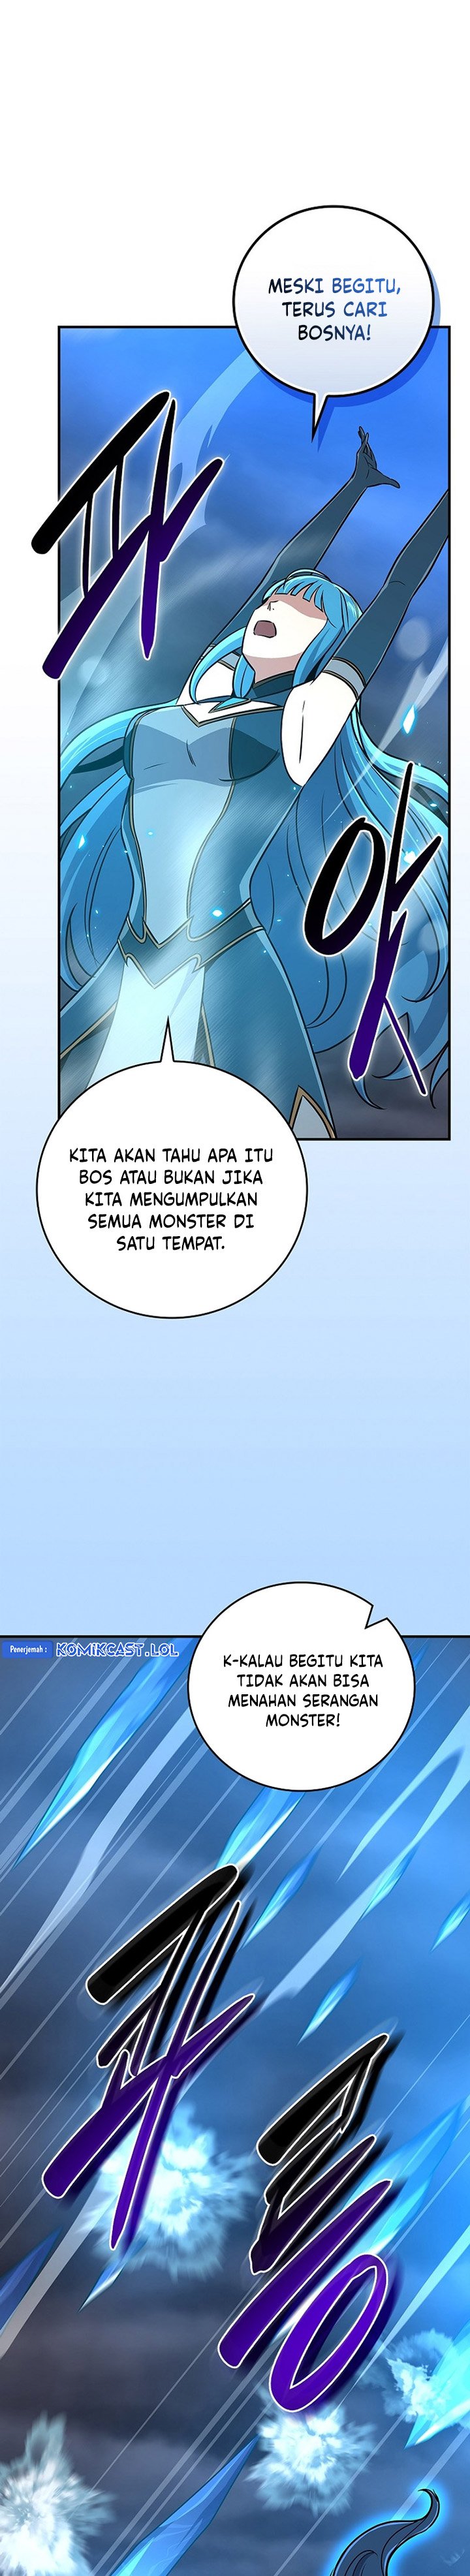 Archmage Streamer Chapter 96 S2 End - 245